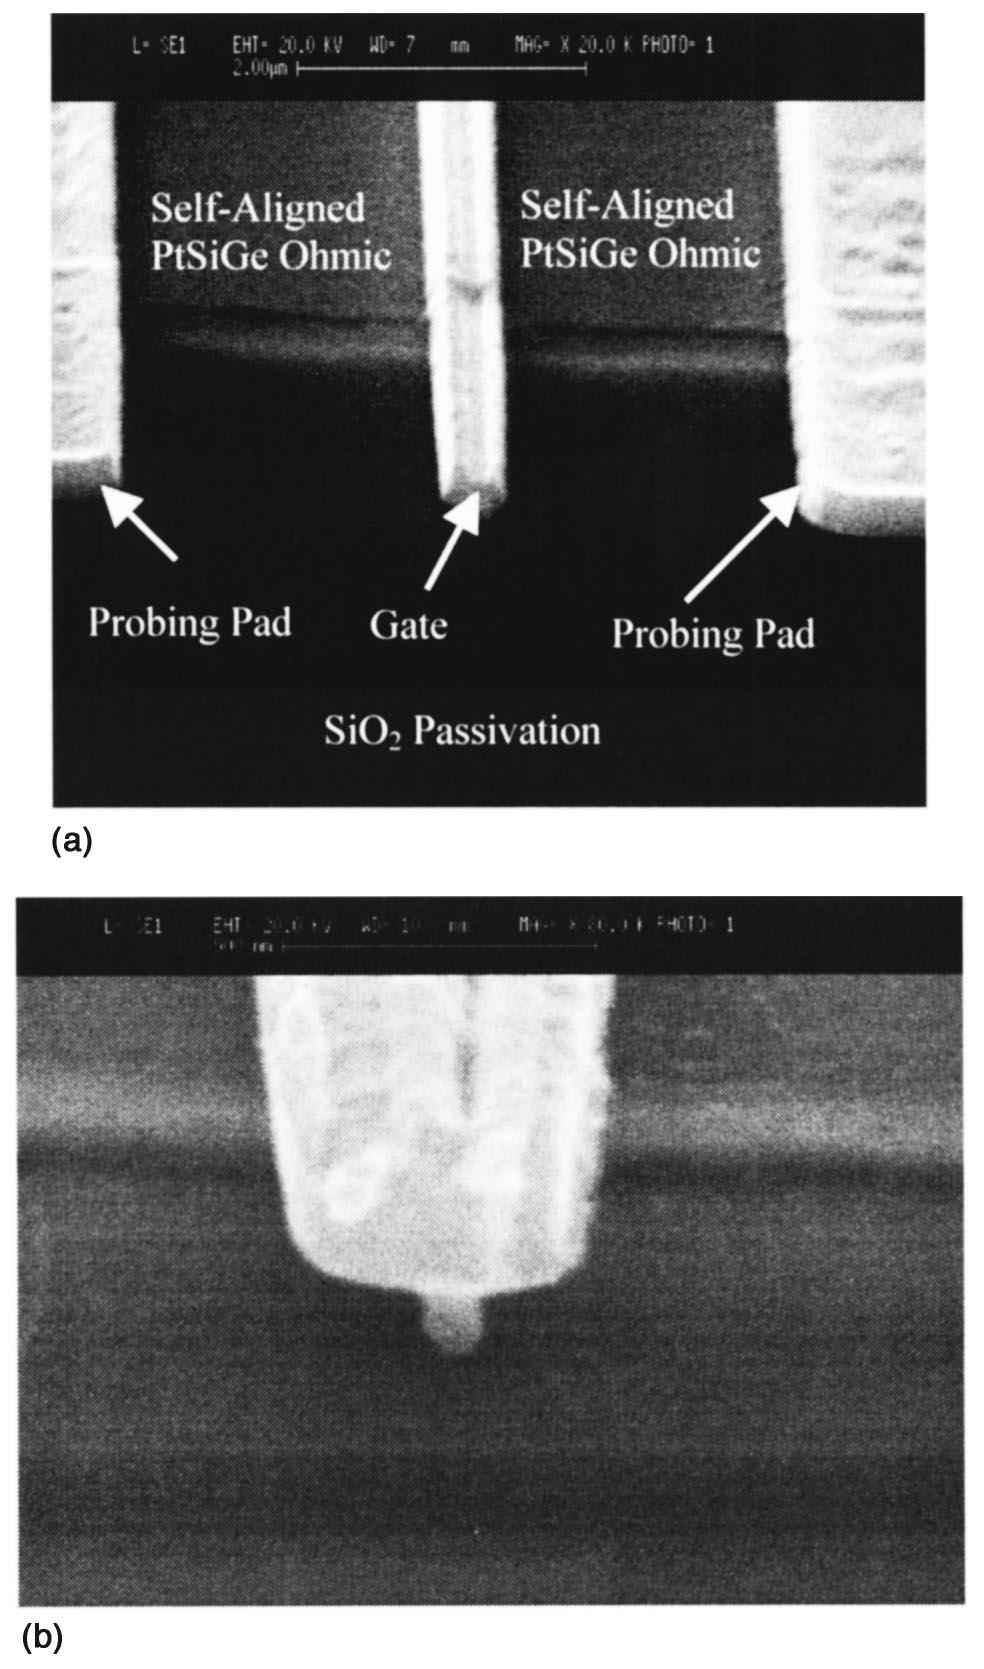 7 To densify the film, postdeposition rapid thermal annealing was performed at 500 C for 30 s. The physical thickness of the gate dielectric layer is 5 nm, equivalent to an oxide thickness of 3 nm.